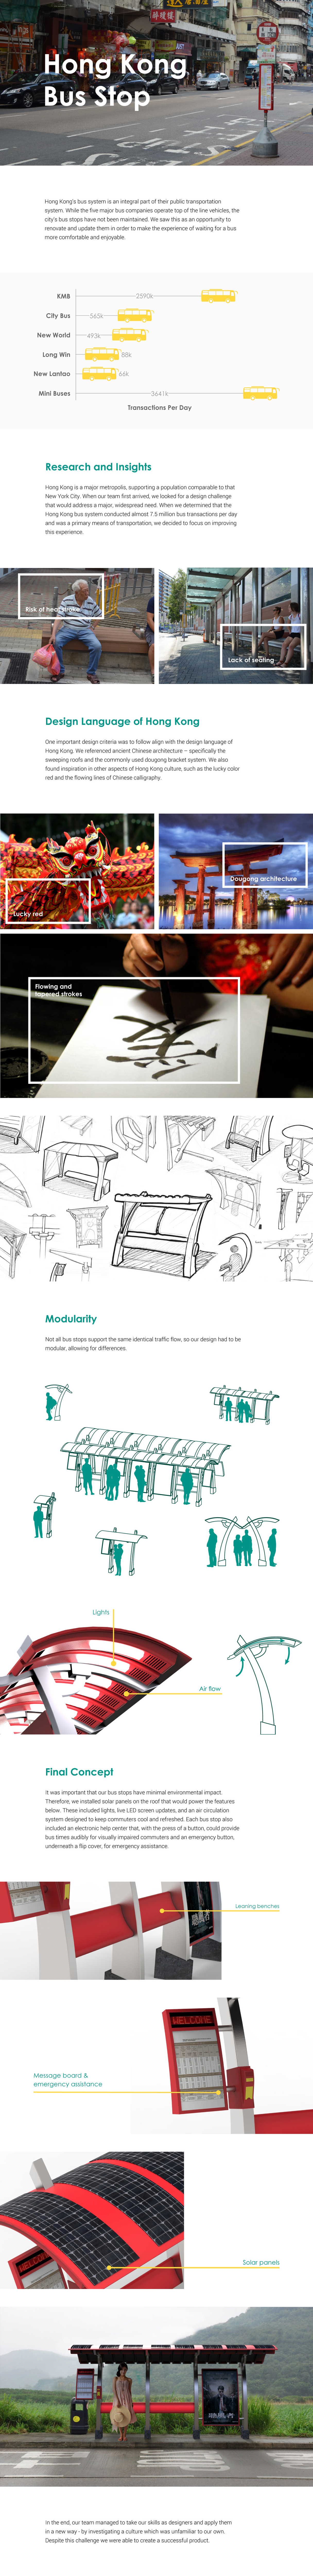 bus stop Hong Kong bus keyshot Solidworks china infographic contextual research photoshop Render